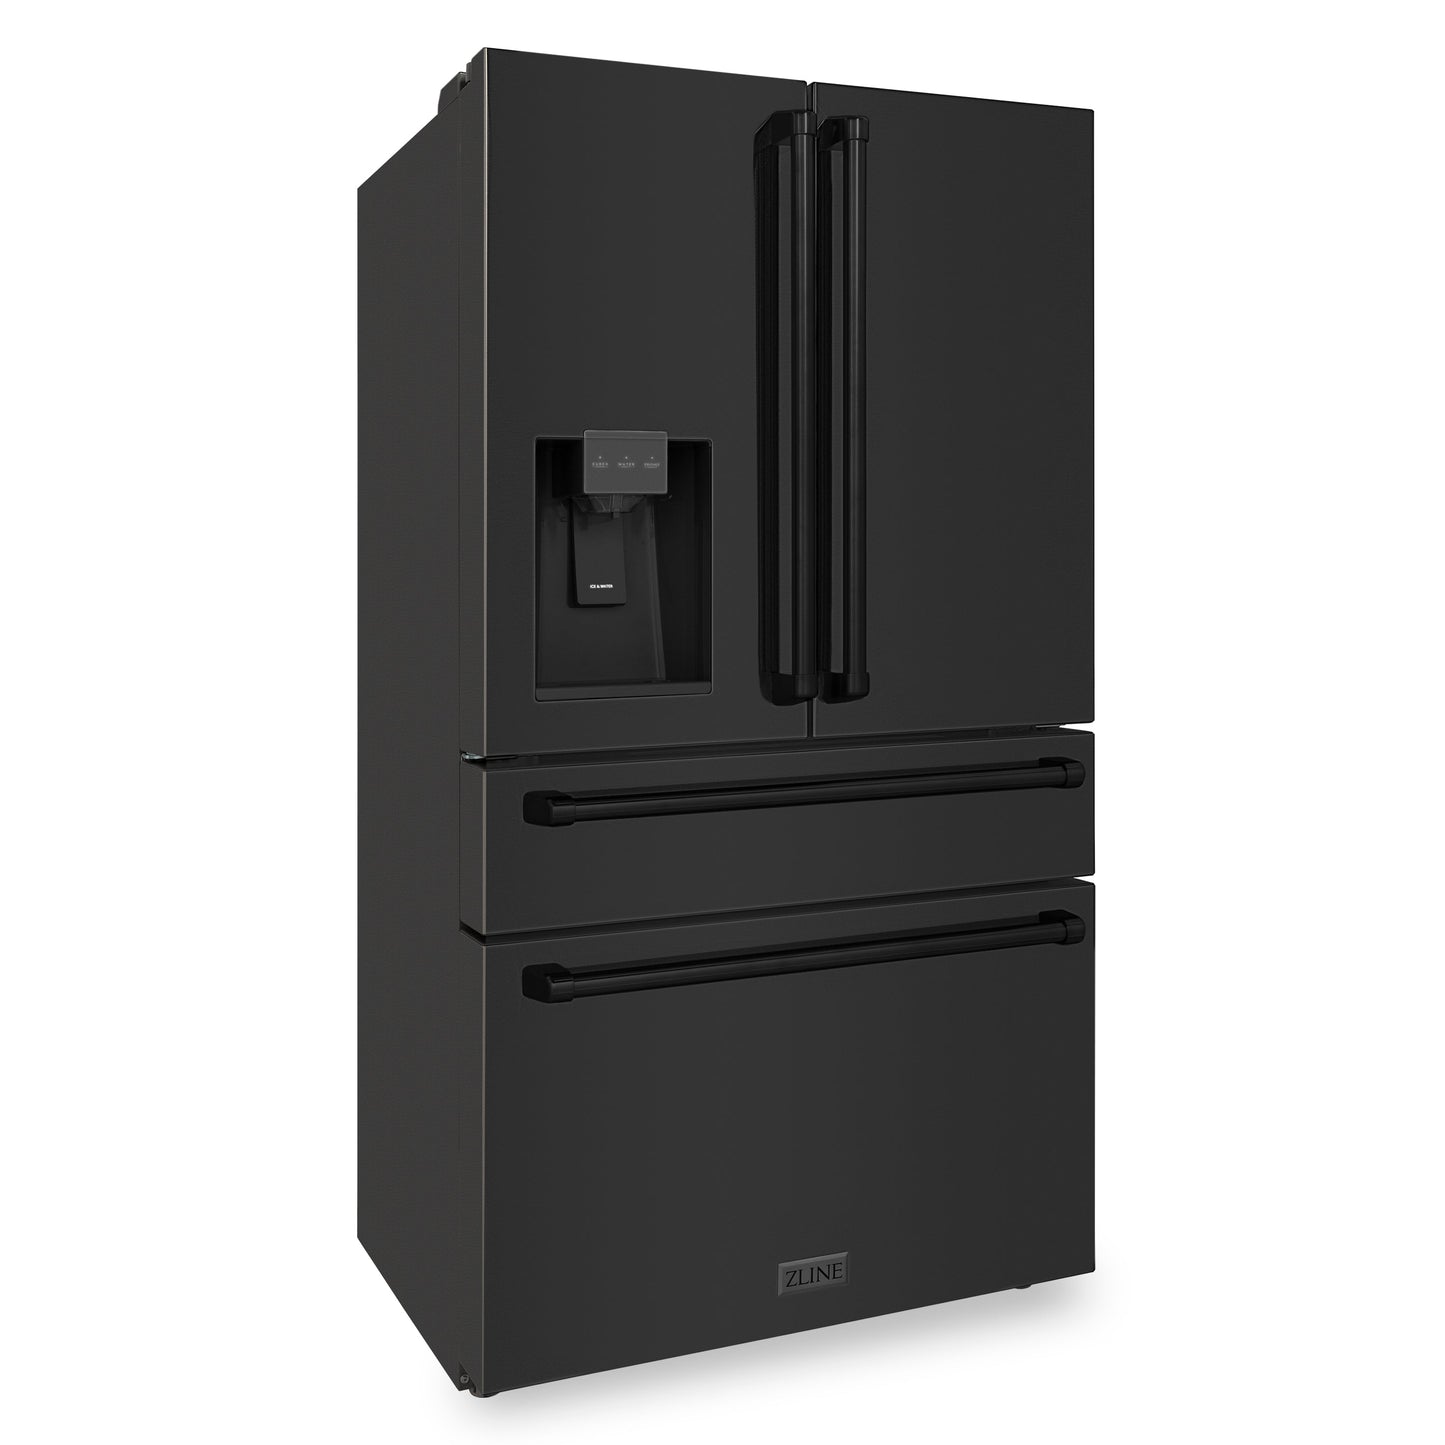 ZLINE 36" 21.6 cu. Ft. French Door Refrigerator with Water and Ice Dispenser and Water Filter in DuraSnow® Black Stainless Steel, RFM-W-WF-36-BS